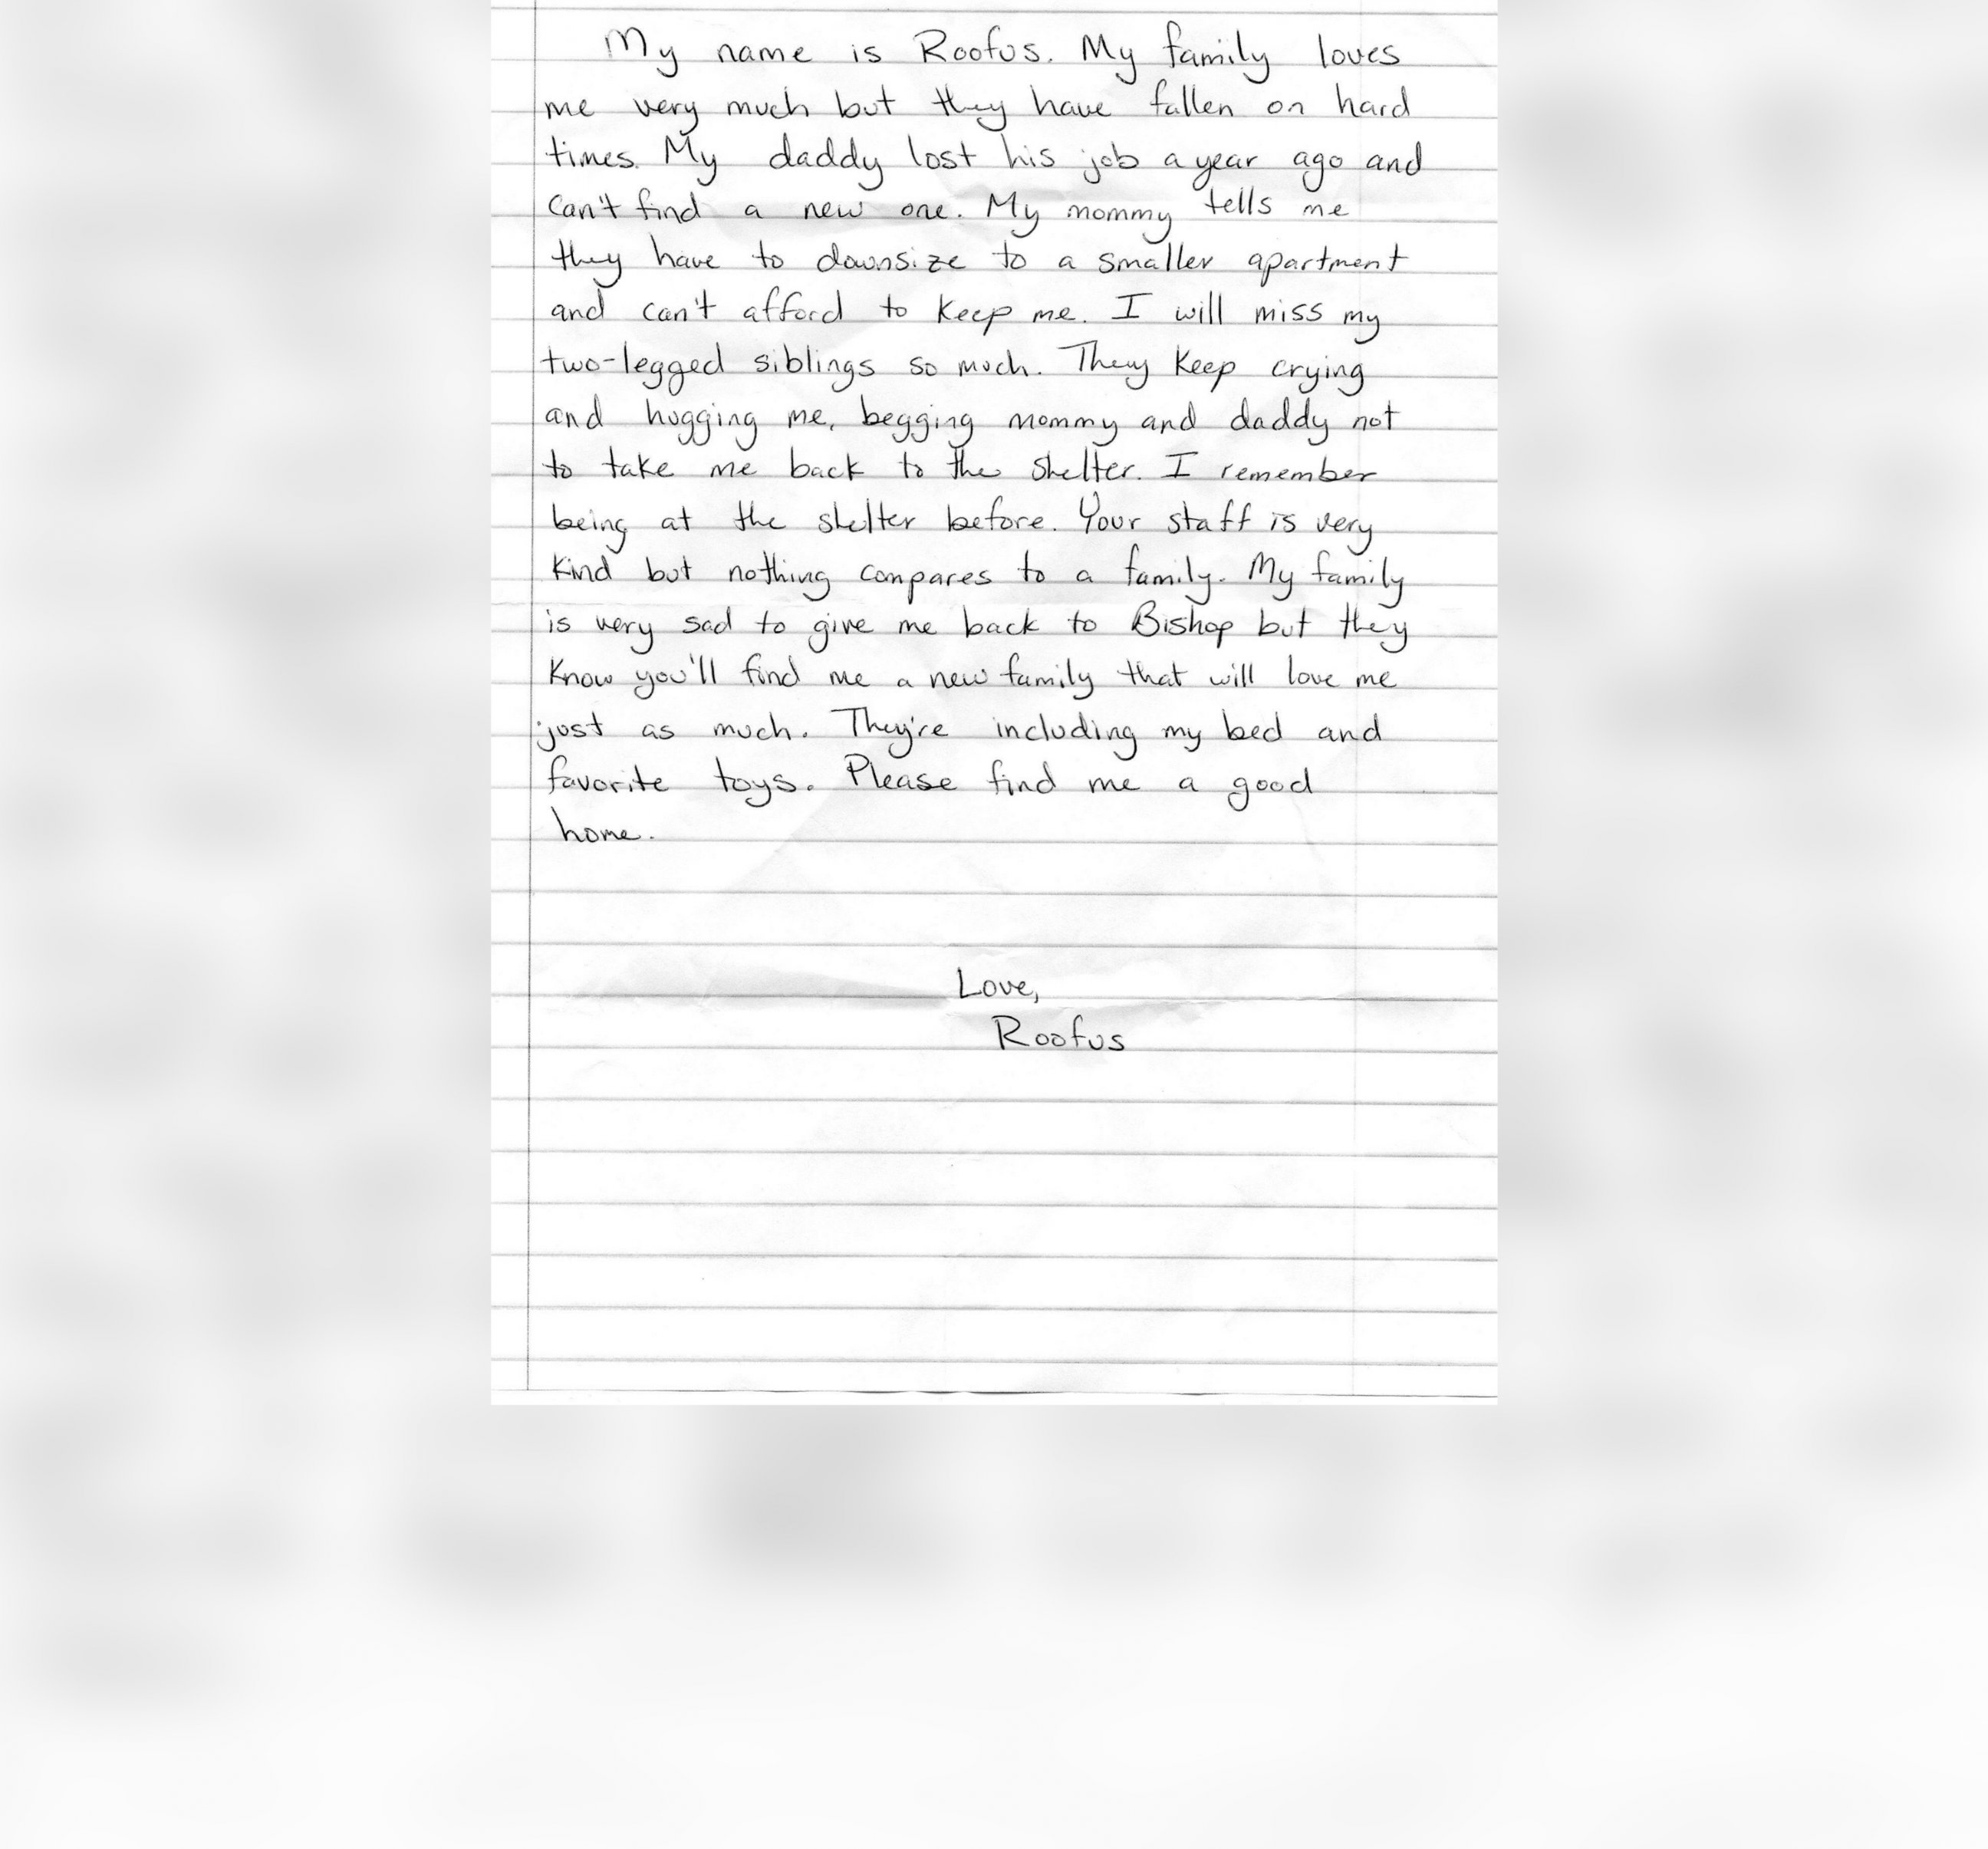 PHOTO: An undated letter left behind by a previous owner of a dog named Roofus is seen in a handout image from the Bishop Animal Shelter in Bradenton, Fla.